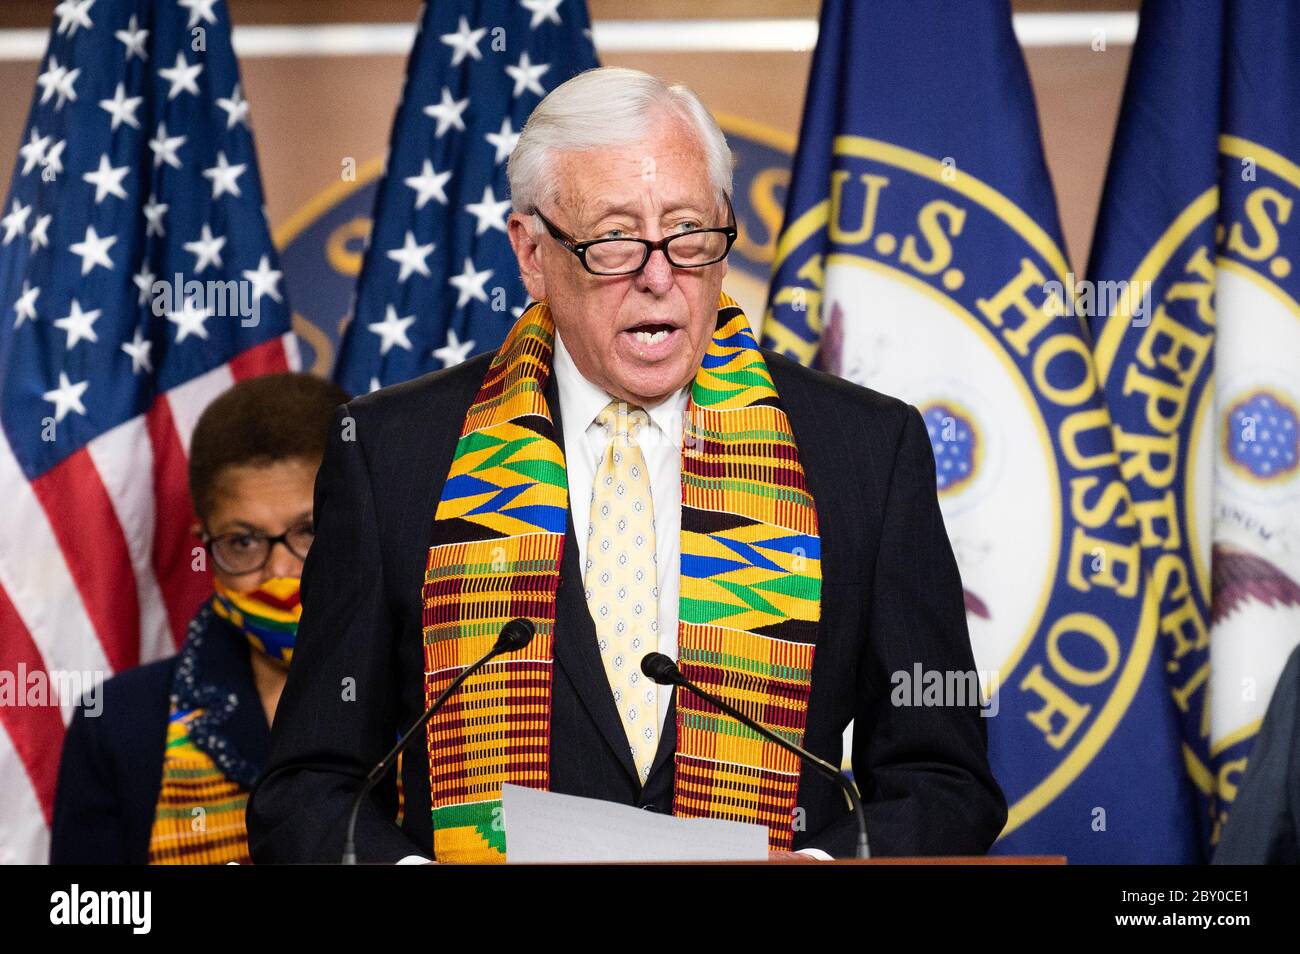 U.S. Representative Steny Hoyer (D-MD)  speaks during a press conference with Congressional Democrats unveiling policing reform and equal justice legislation in Washington. Stock Photo